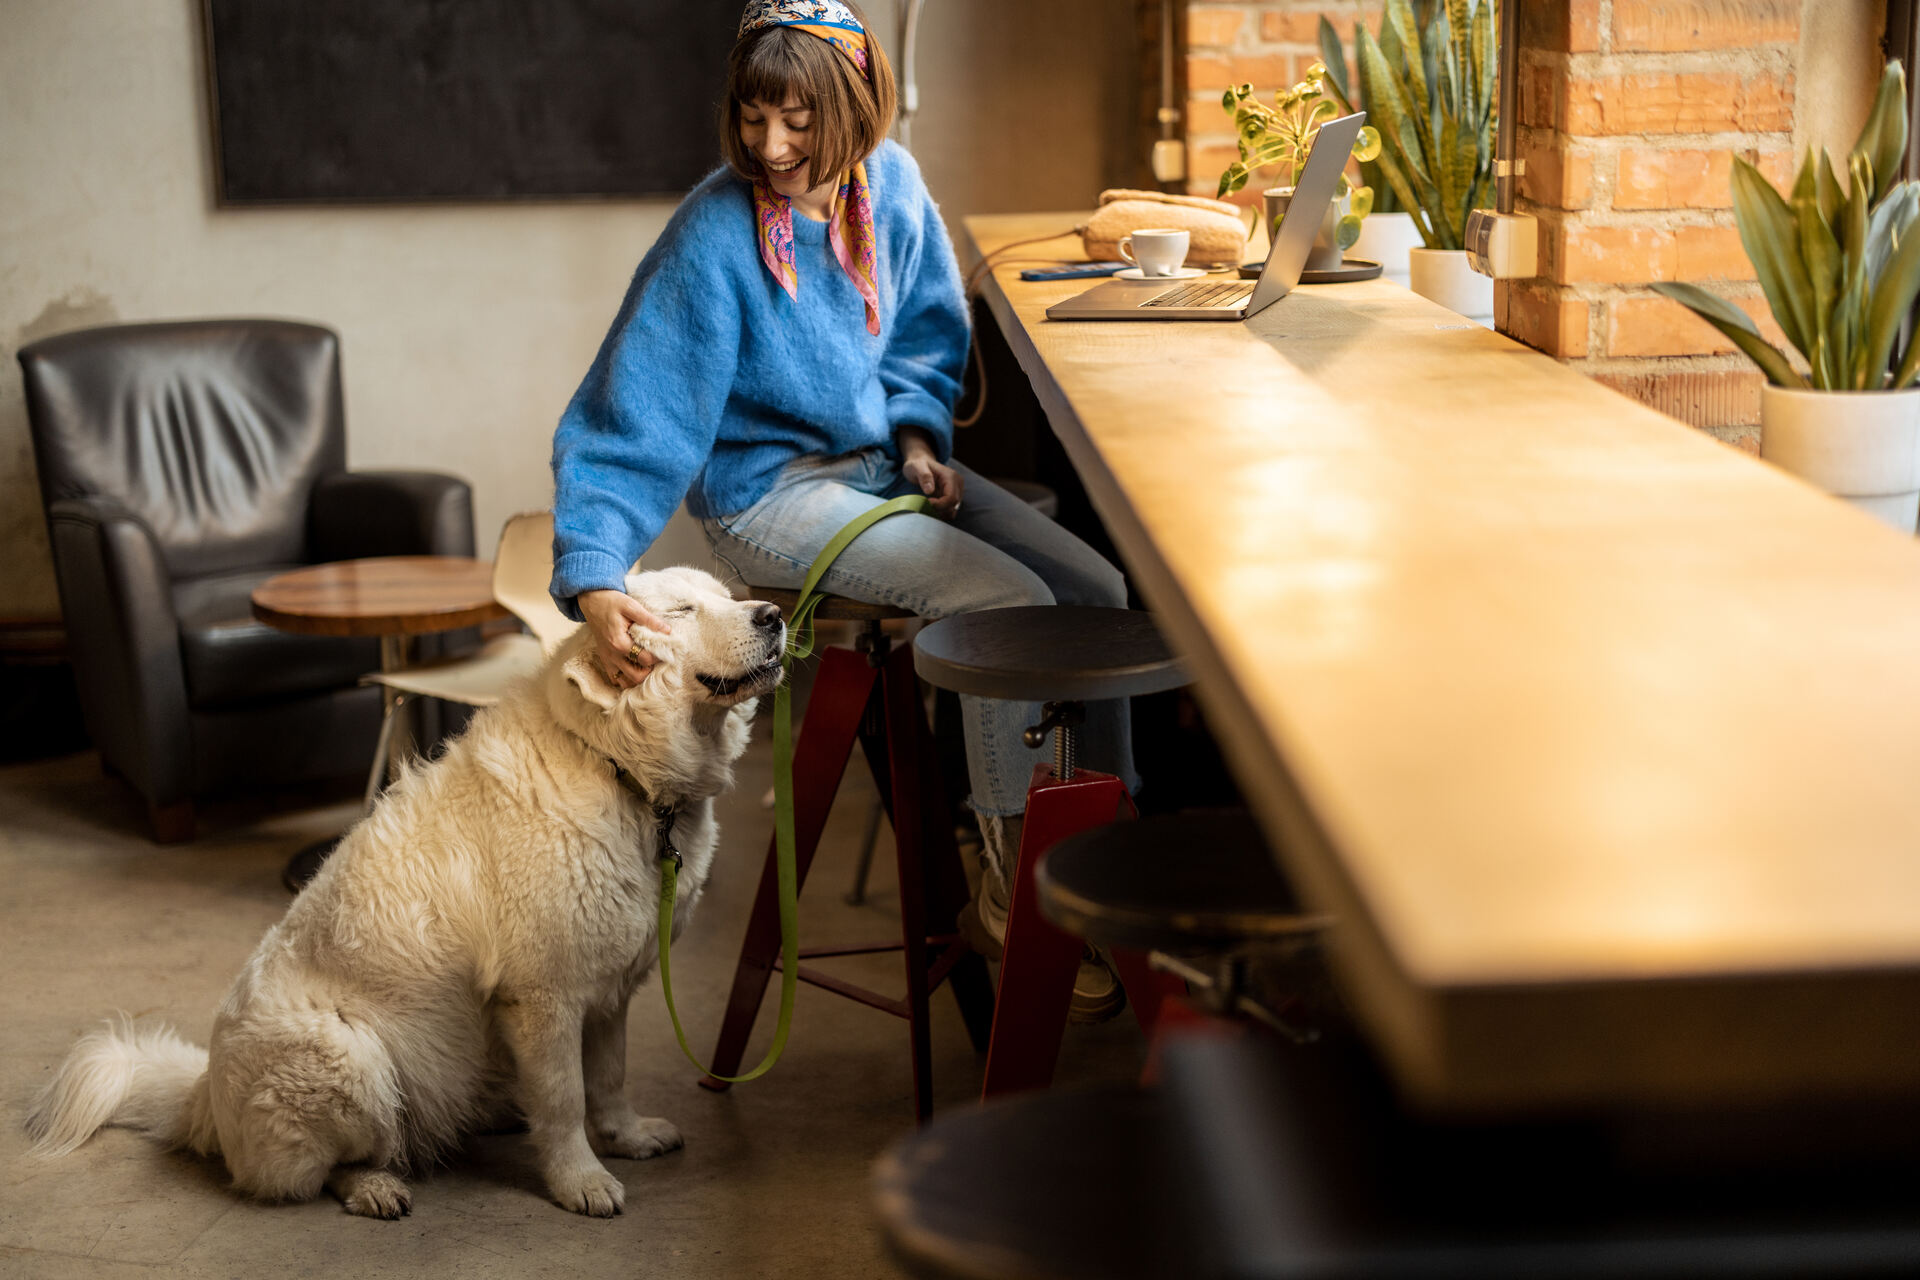 A woman petting a leashed dog at a cafe